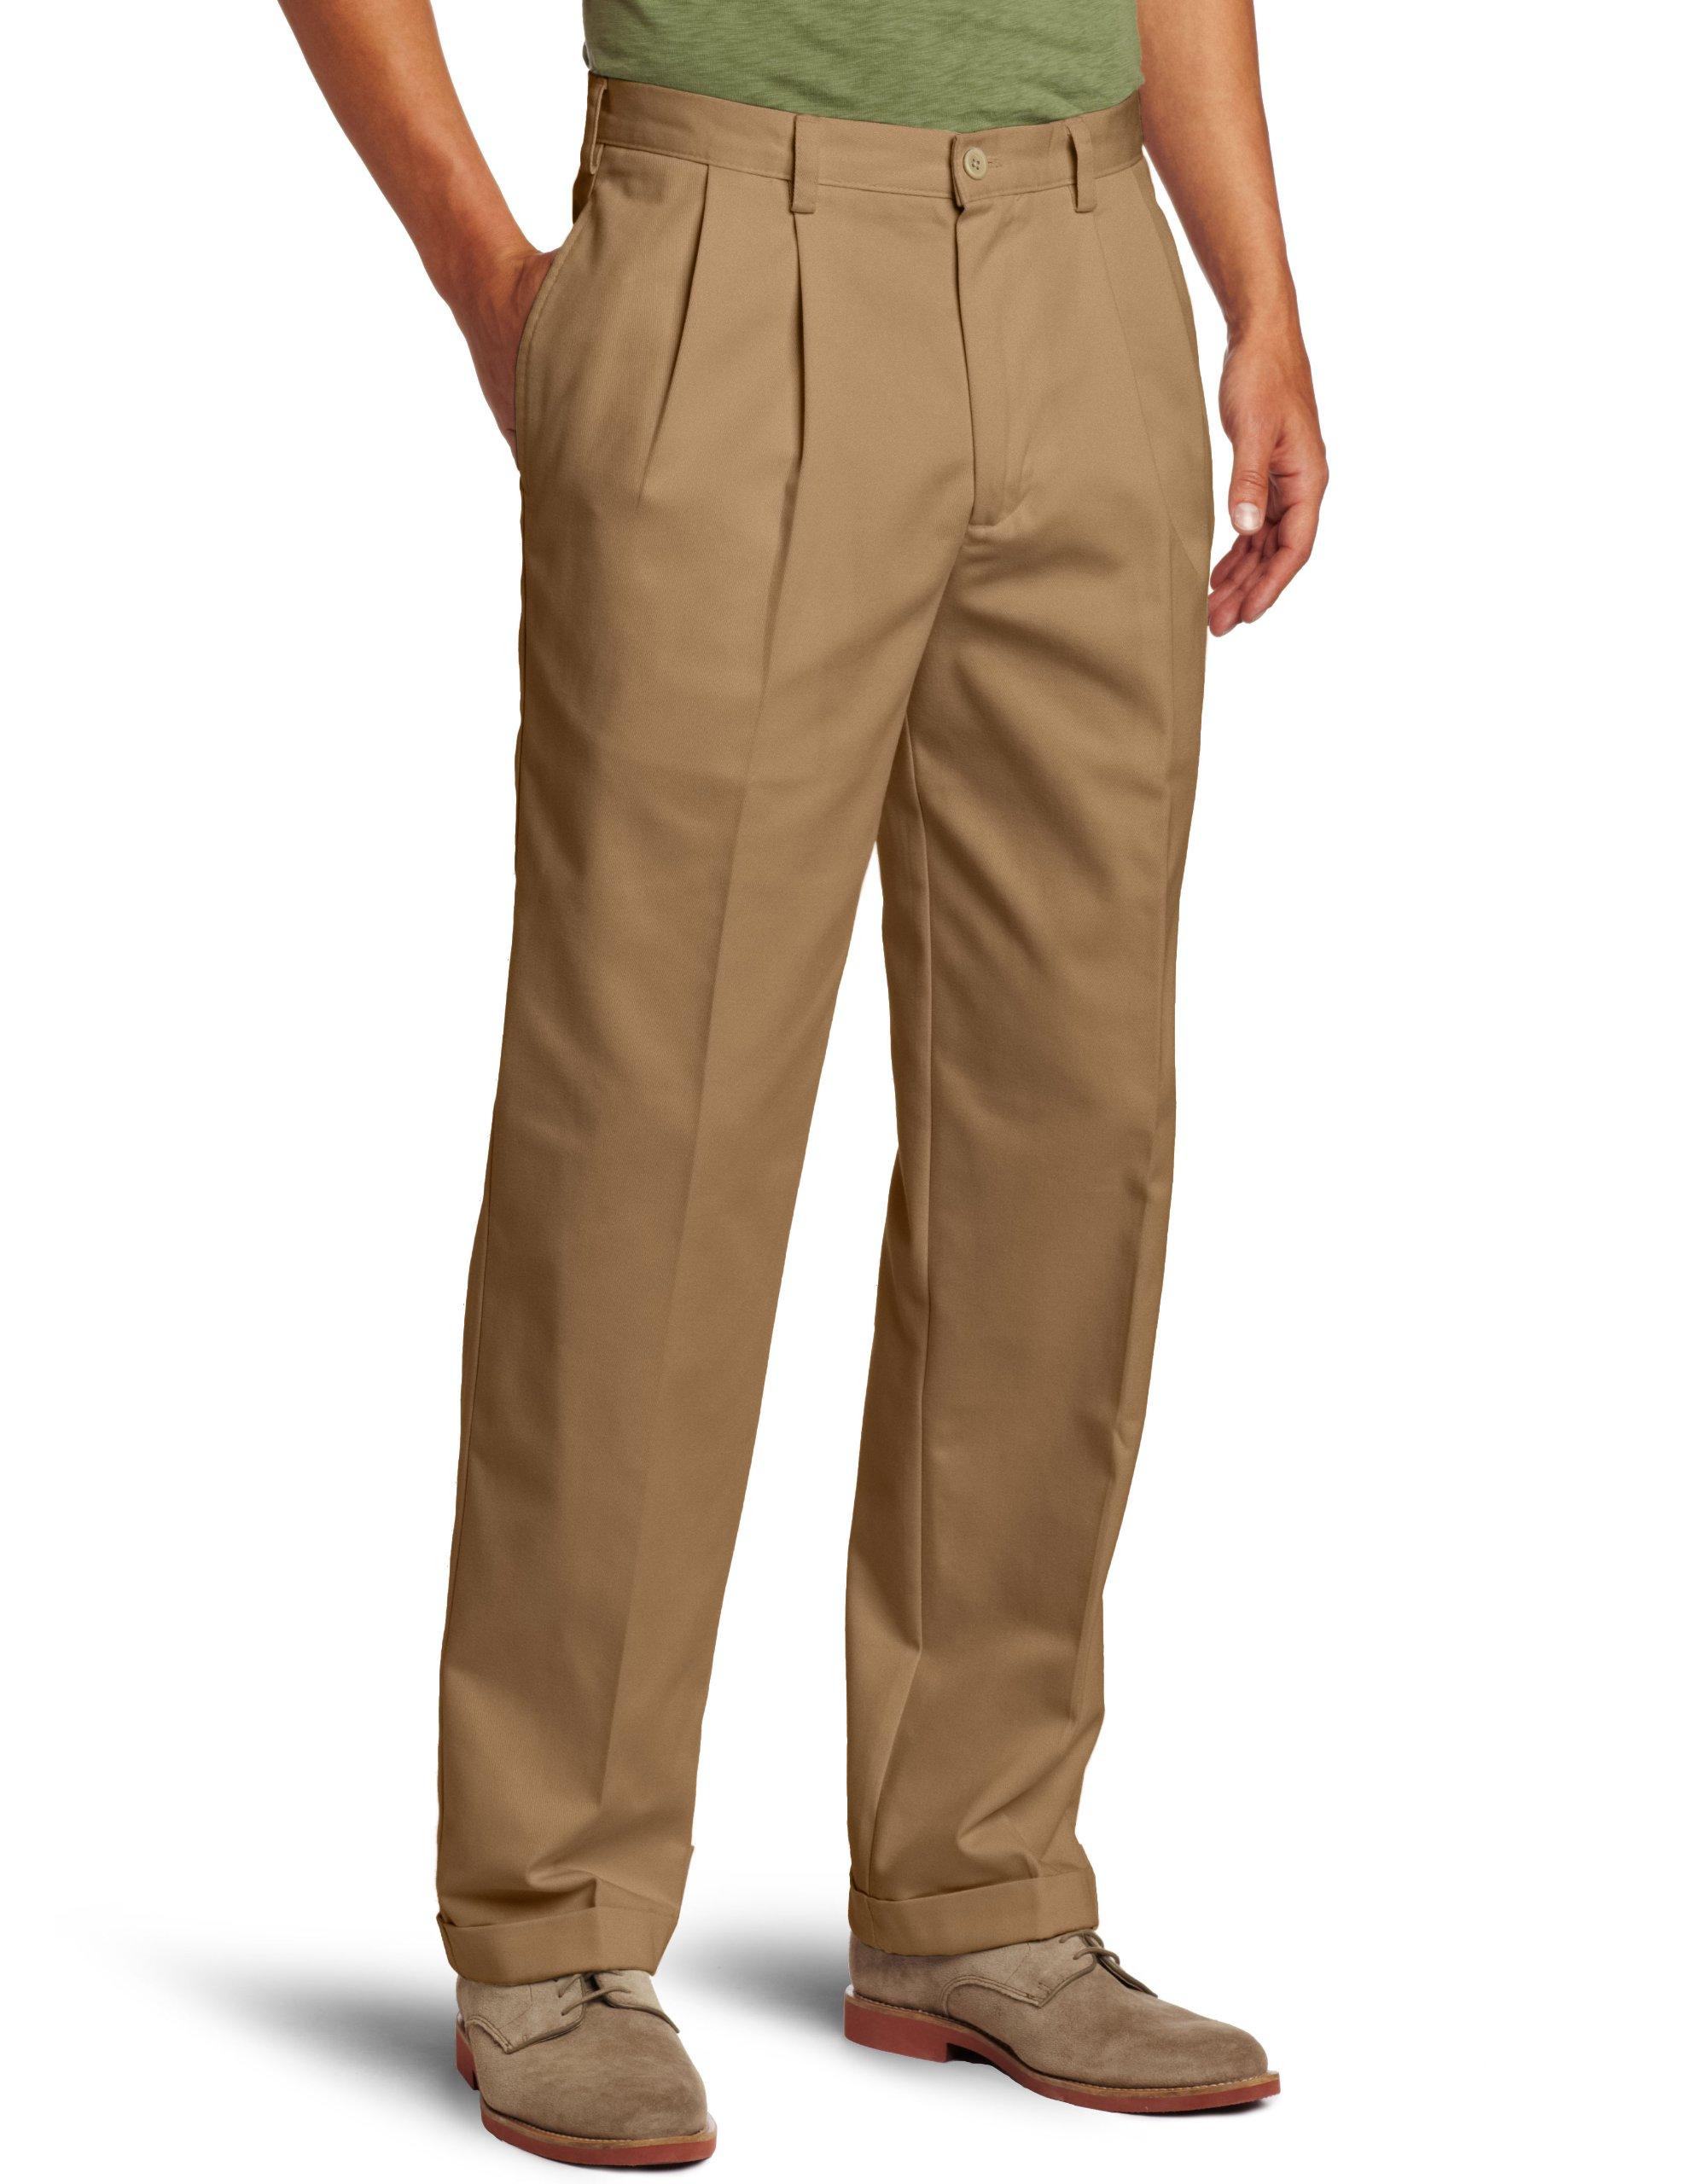 Izod ~ Classic American Chino Men's Double Pleated Pants $50 NWT 